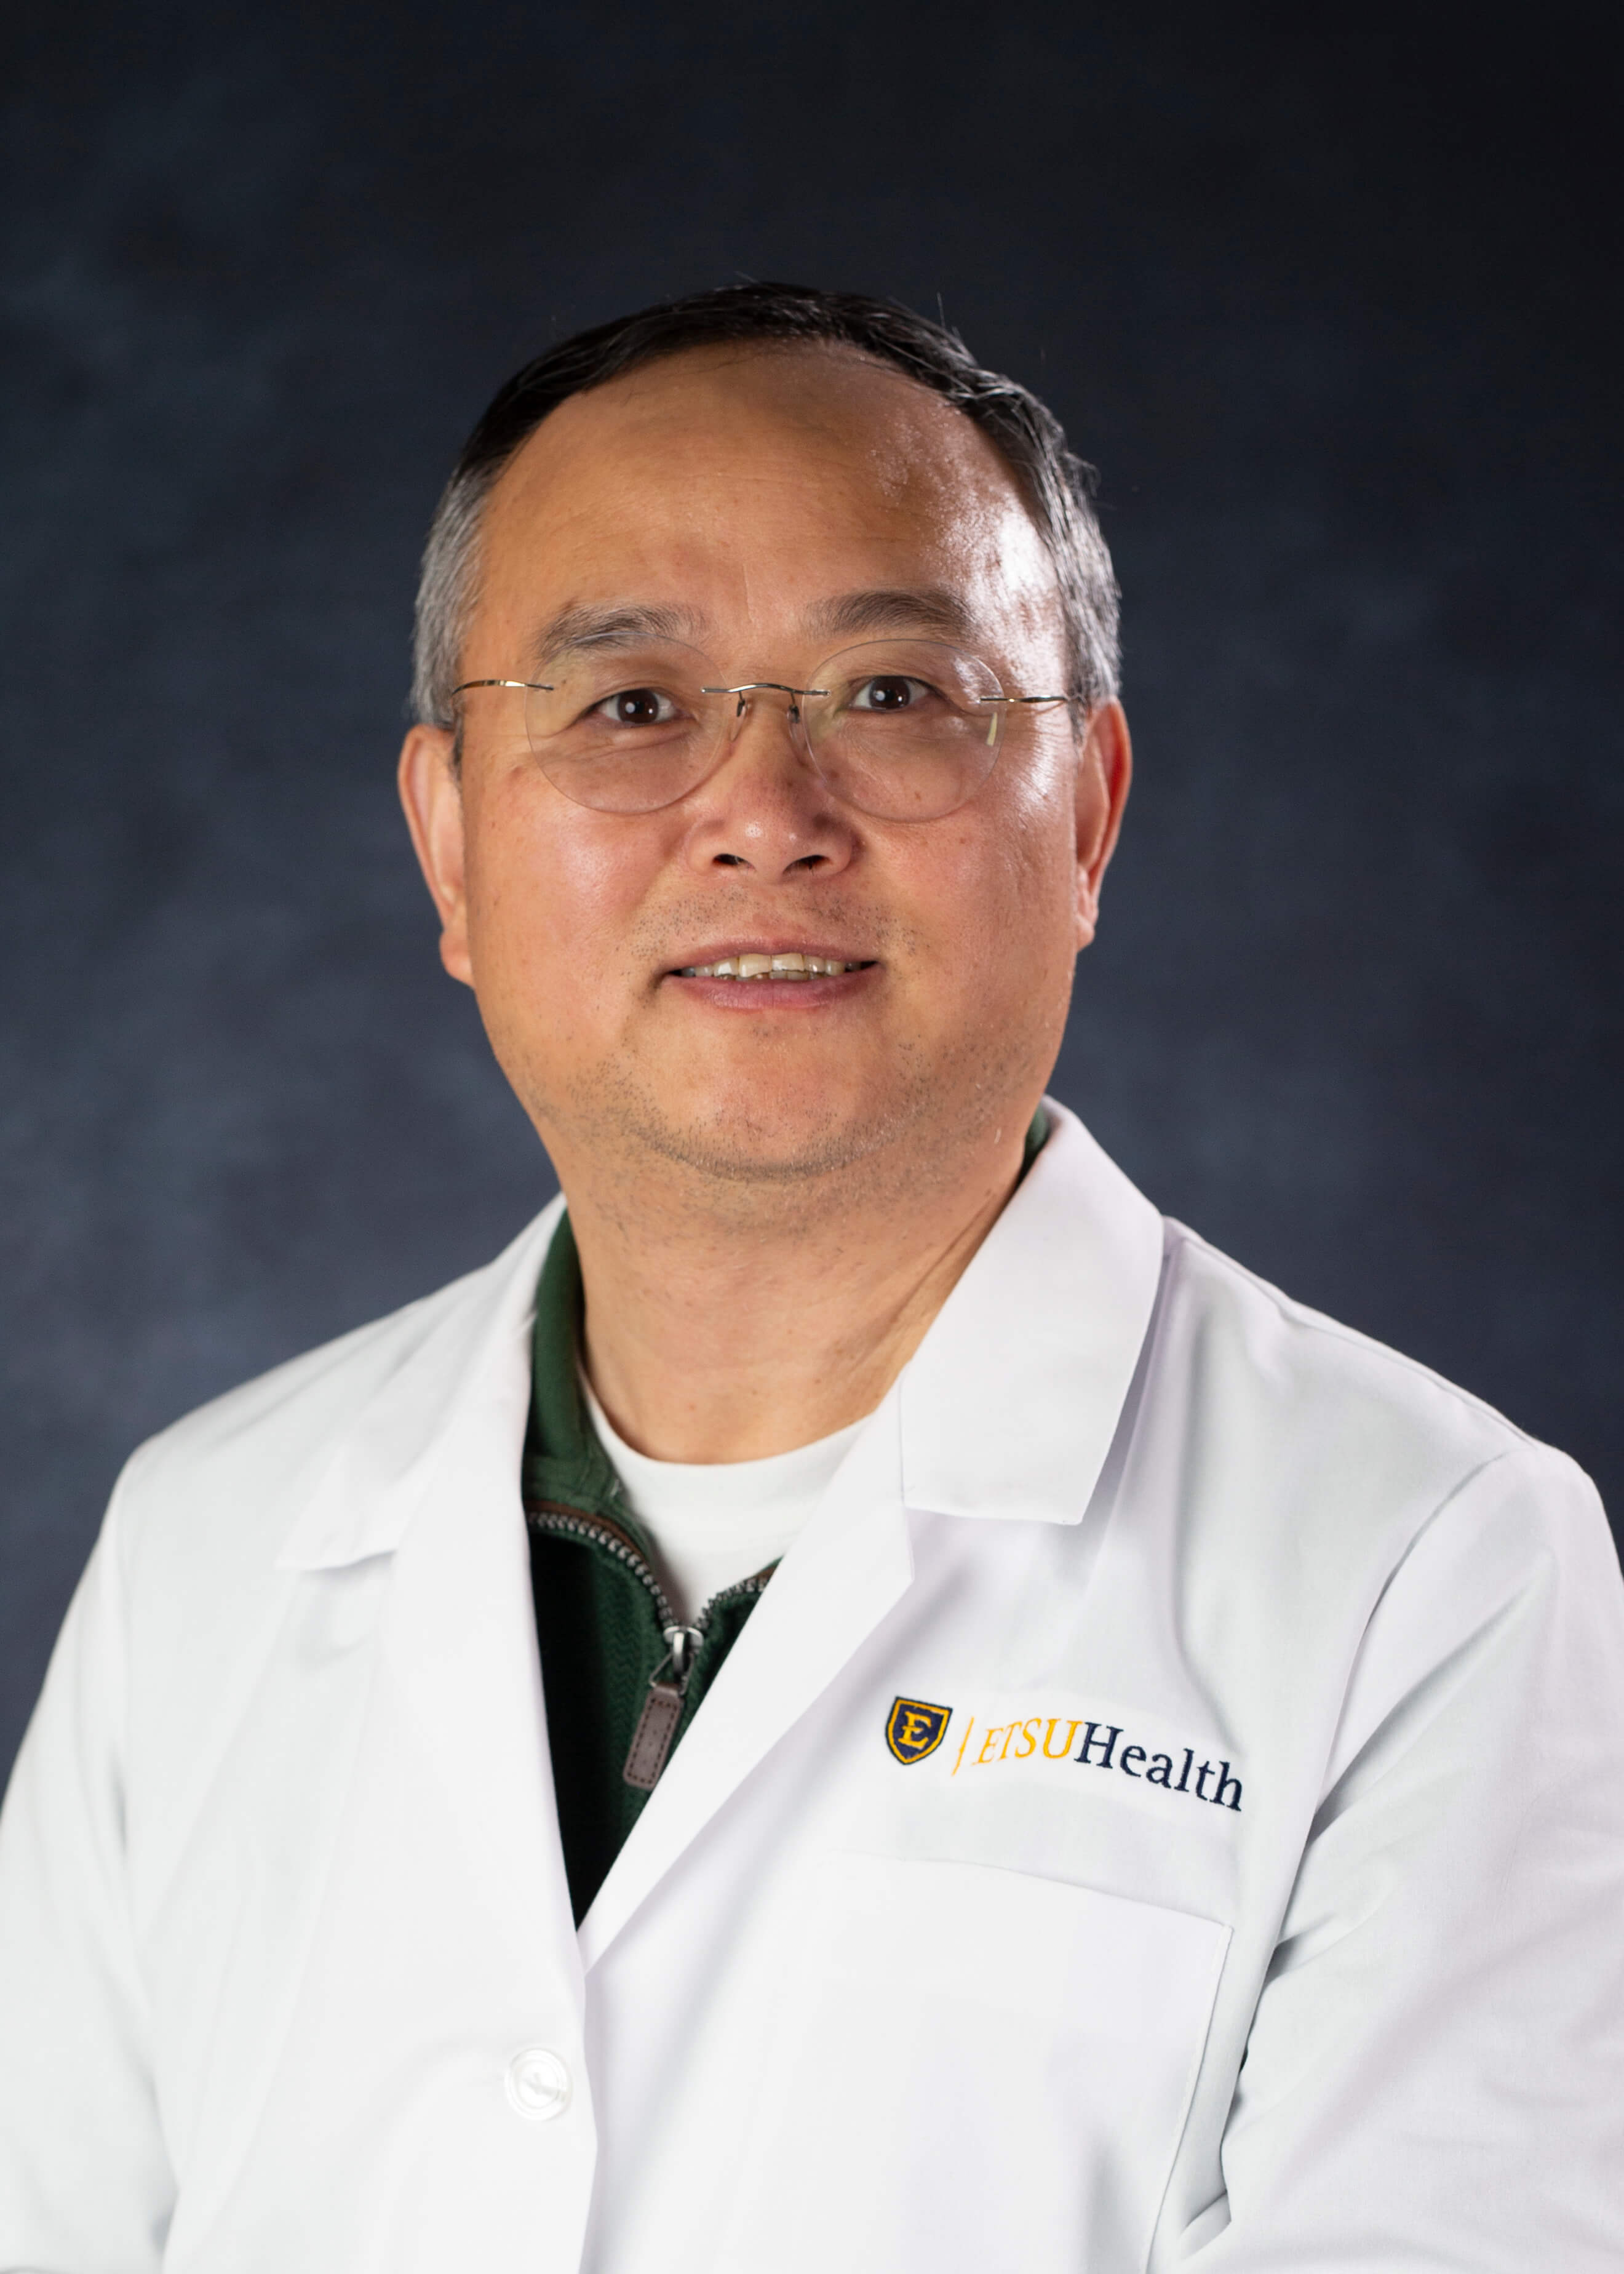 Photo of Zhi Qiang Yao, MD, PhD Division Chief - Research, Professor